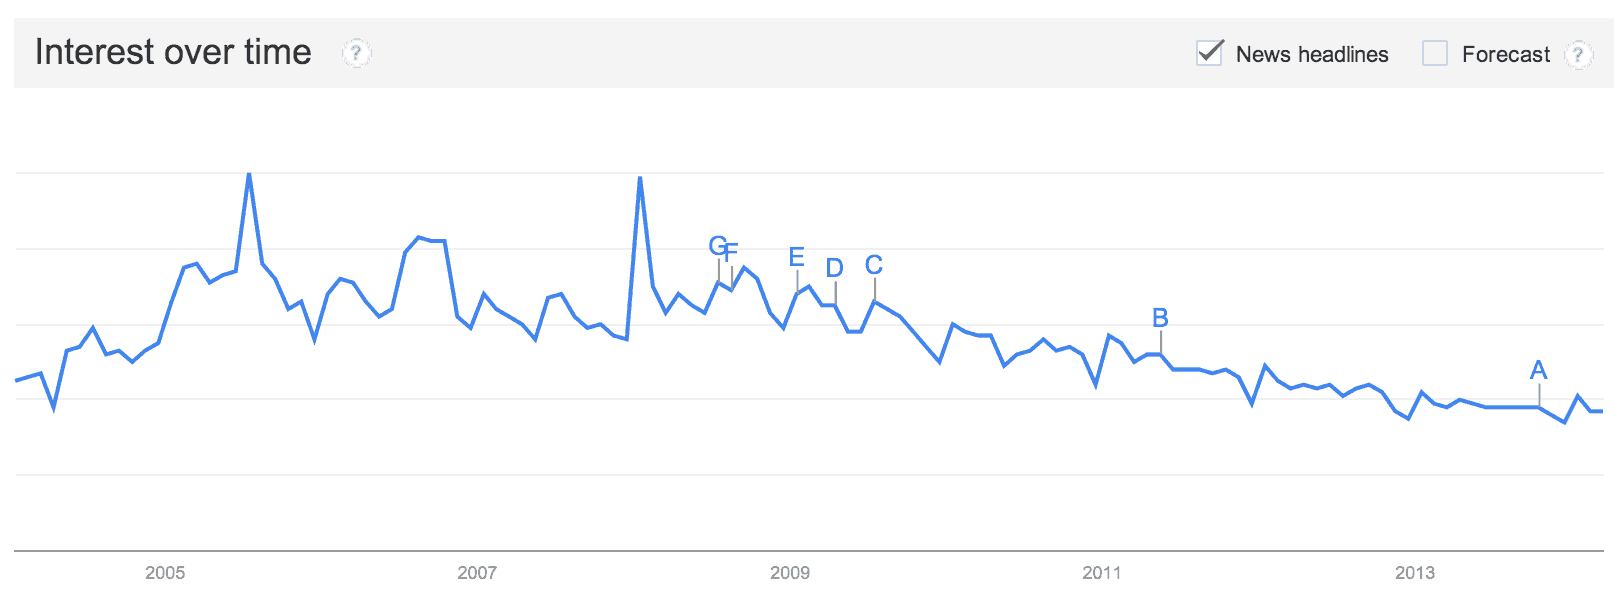 Popularity Of Term “Blogging” Over Time